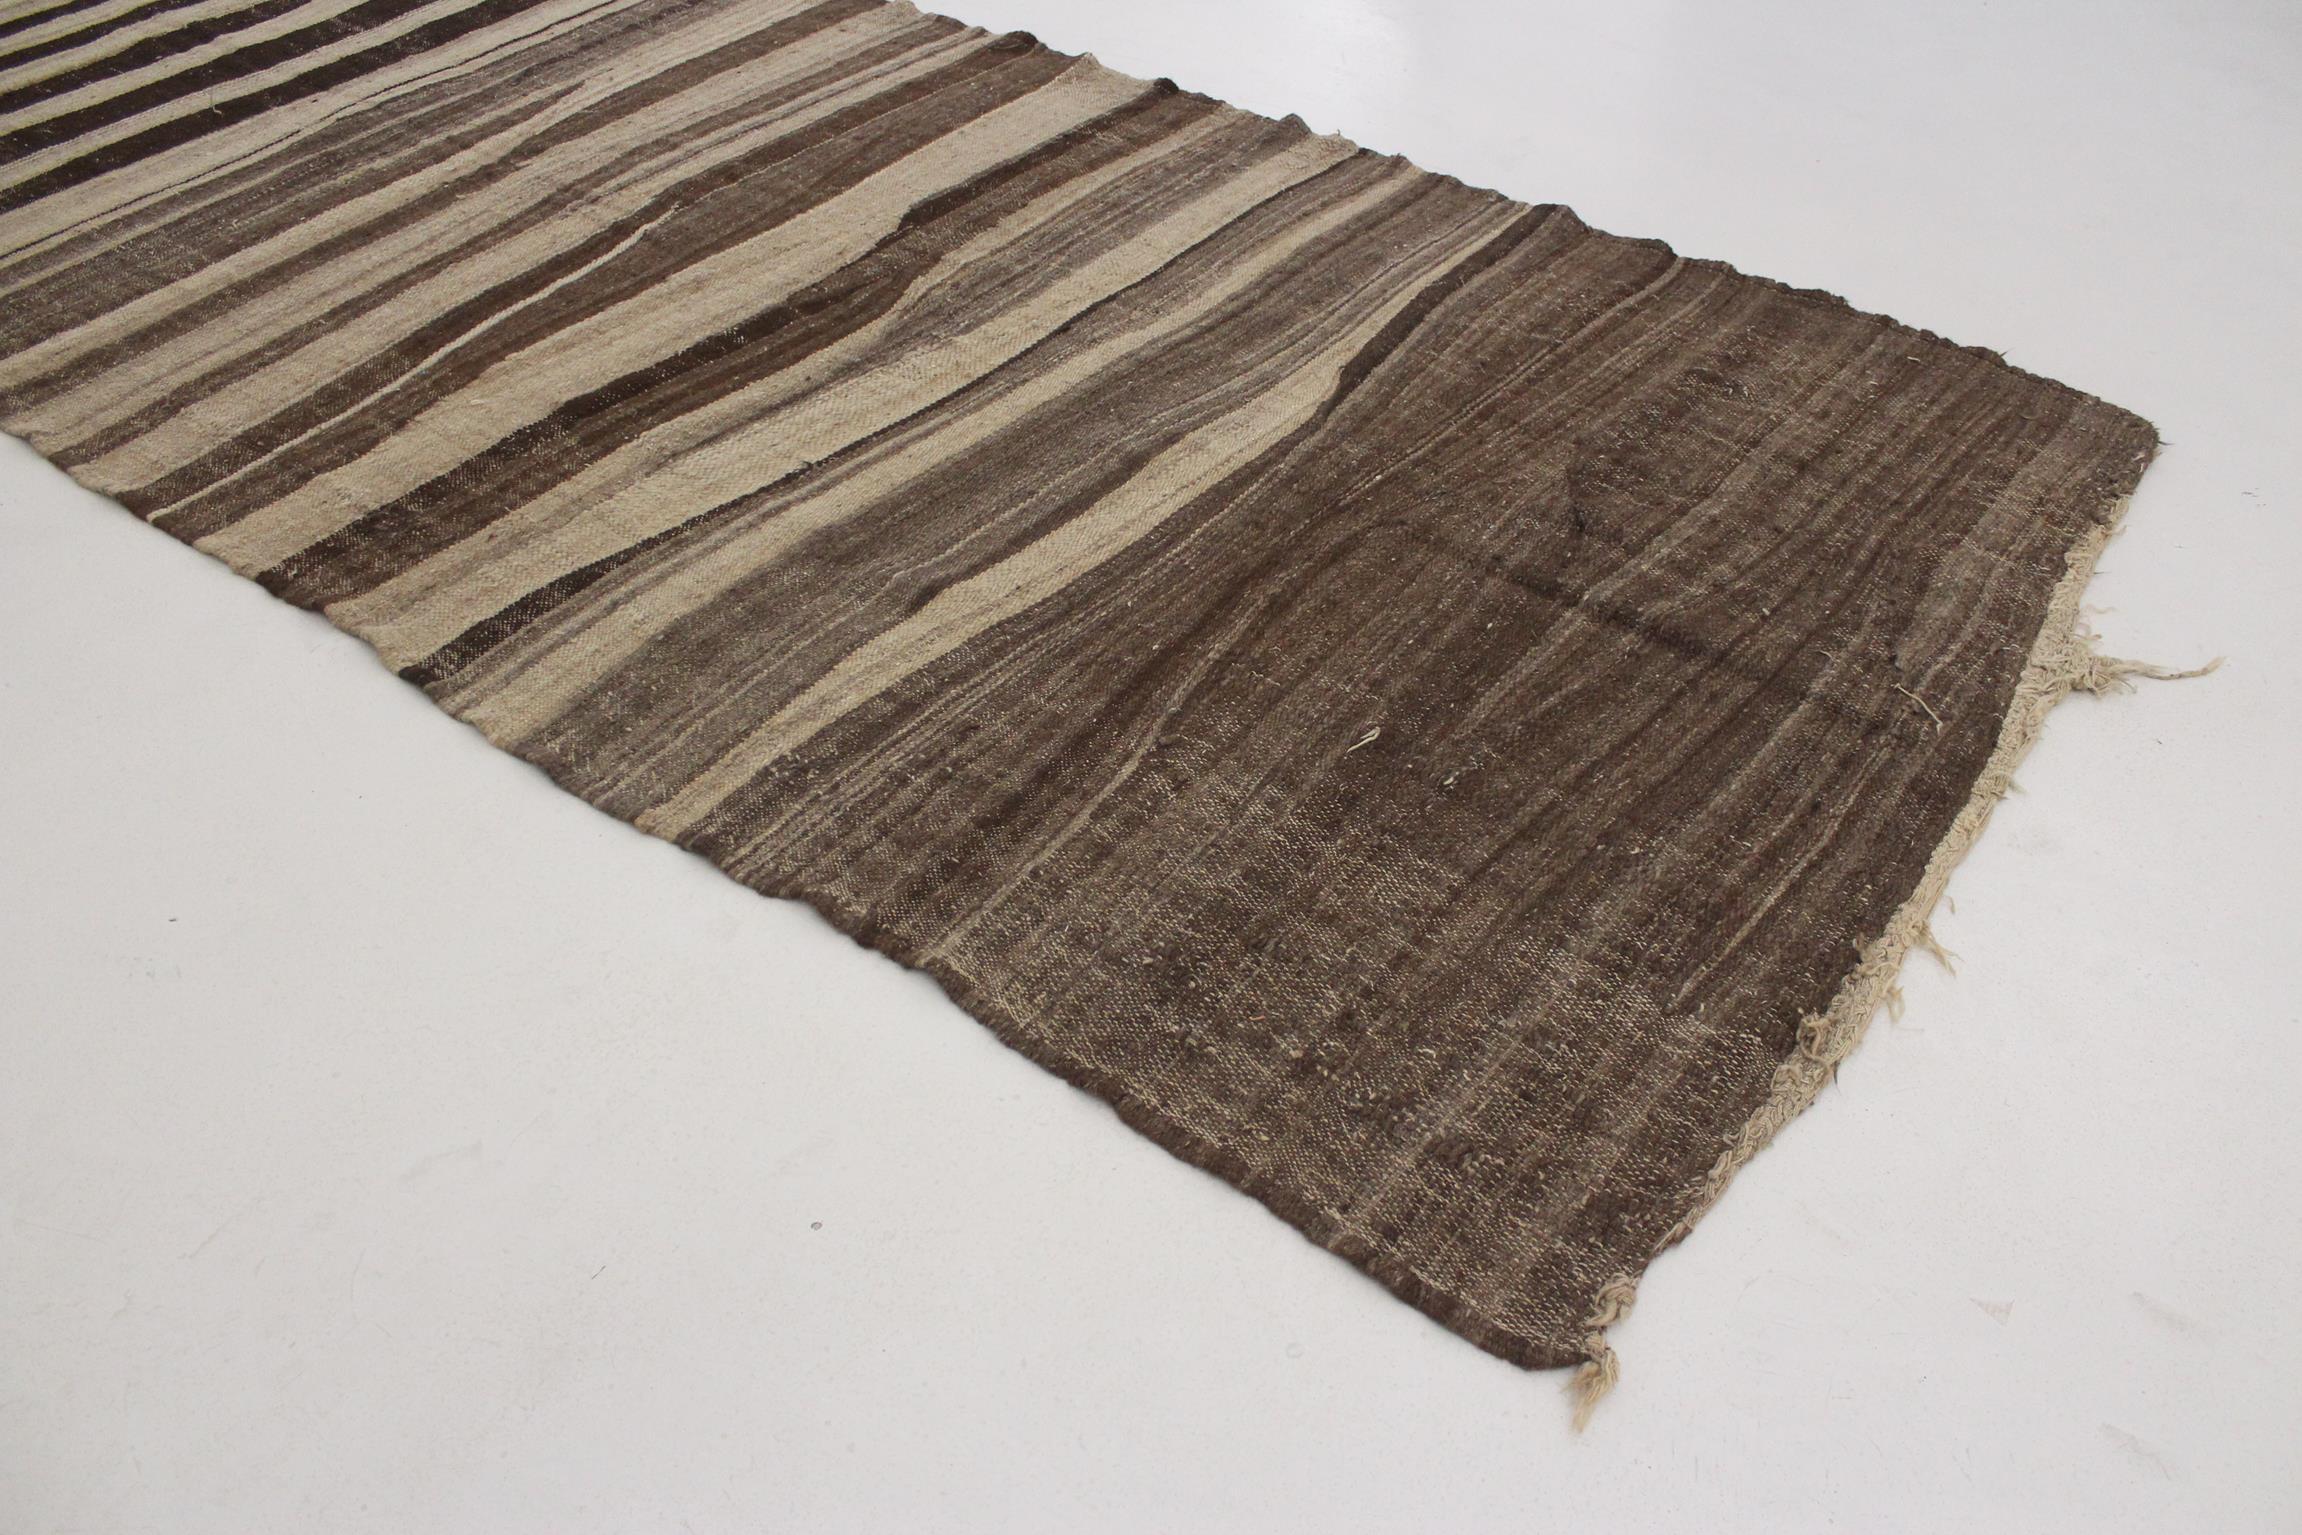 I sourced this rustic, heavy blanket or light kilim rug in the city of Taroudant, Morocco. I literally jump on a rug or textile when I find one with those wavy stripes! Did not hesitate for a minute when I met this beautiful vintage, rustic yet